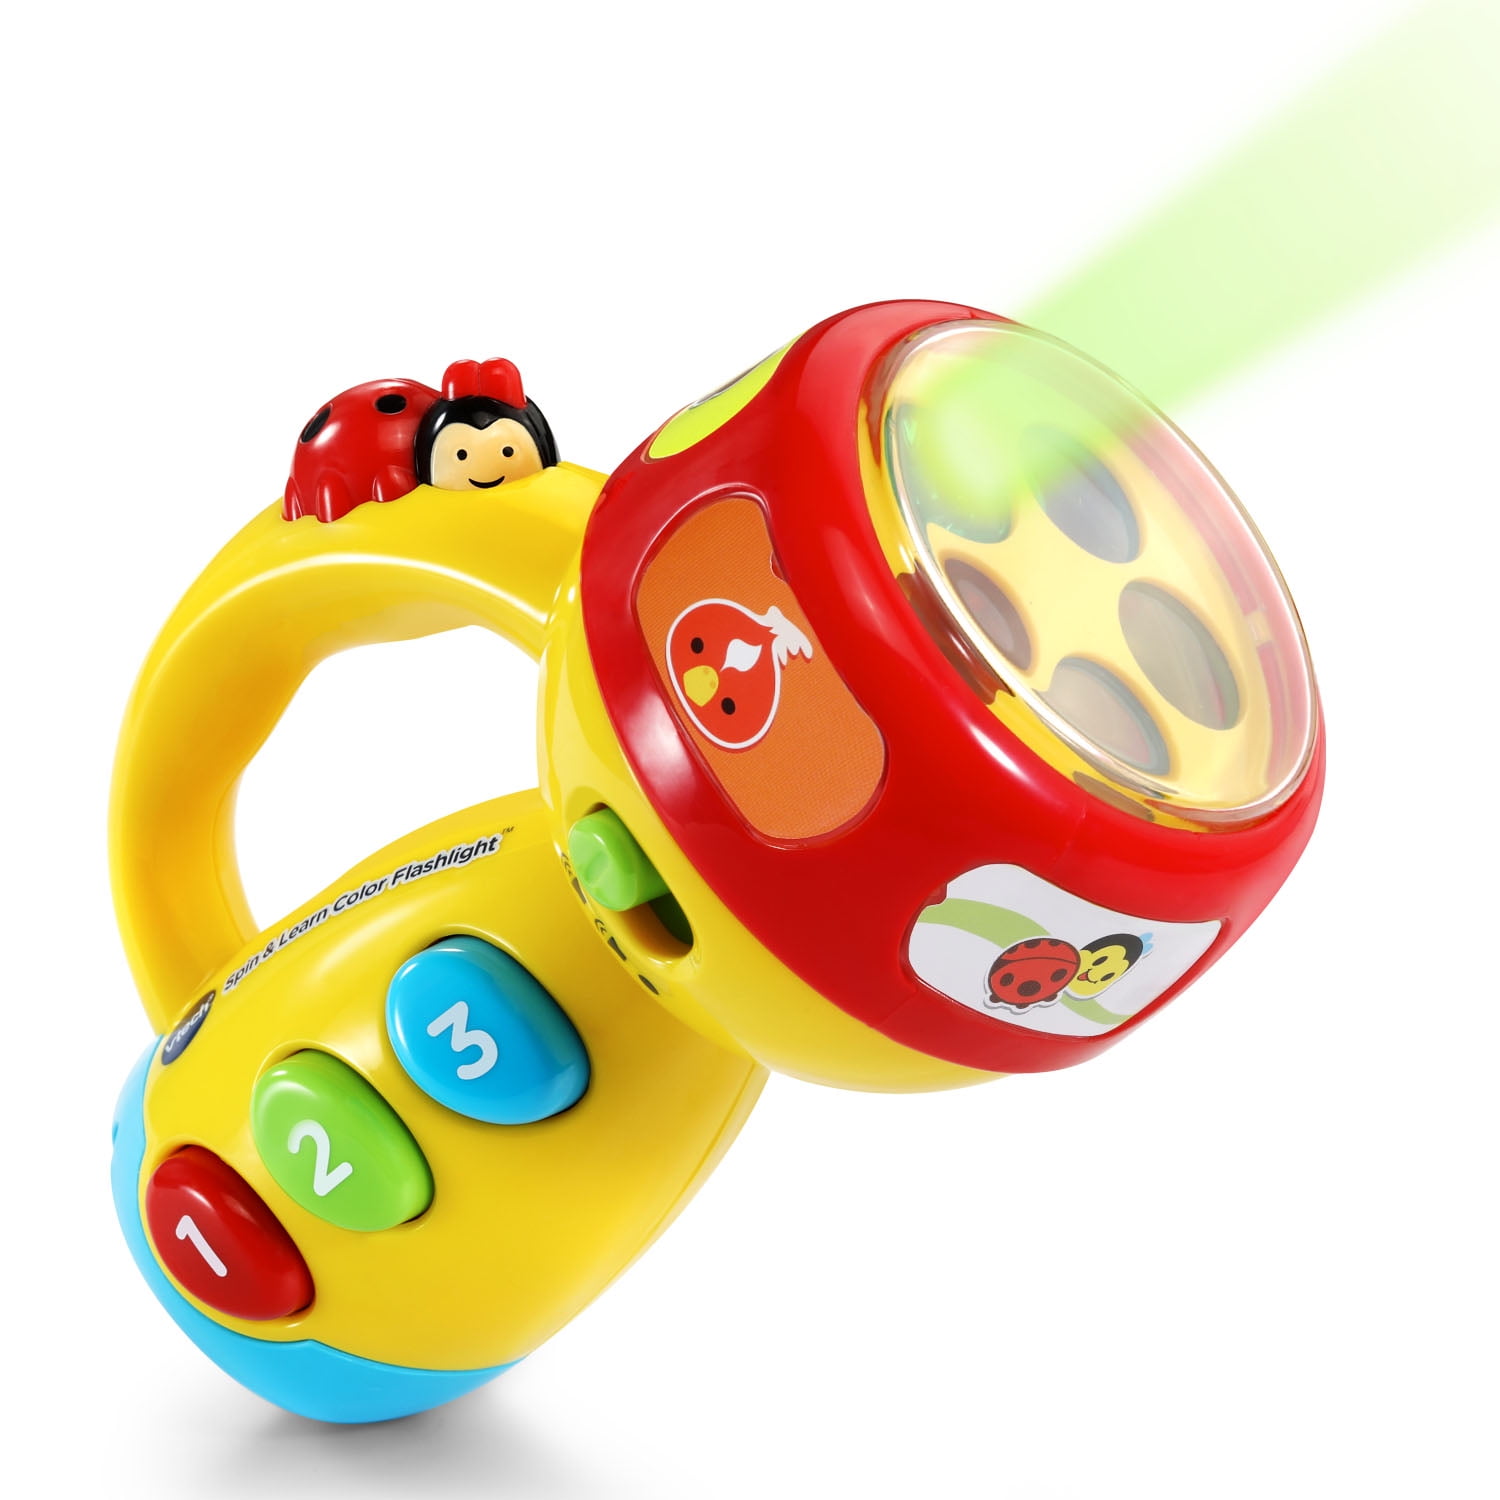 Super Bright LED+Sound Flashlight Keychain with Spin and Turbo Sound Toy SOS Light Novelty Innovative Gift for Dad,Boyfriend Pink